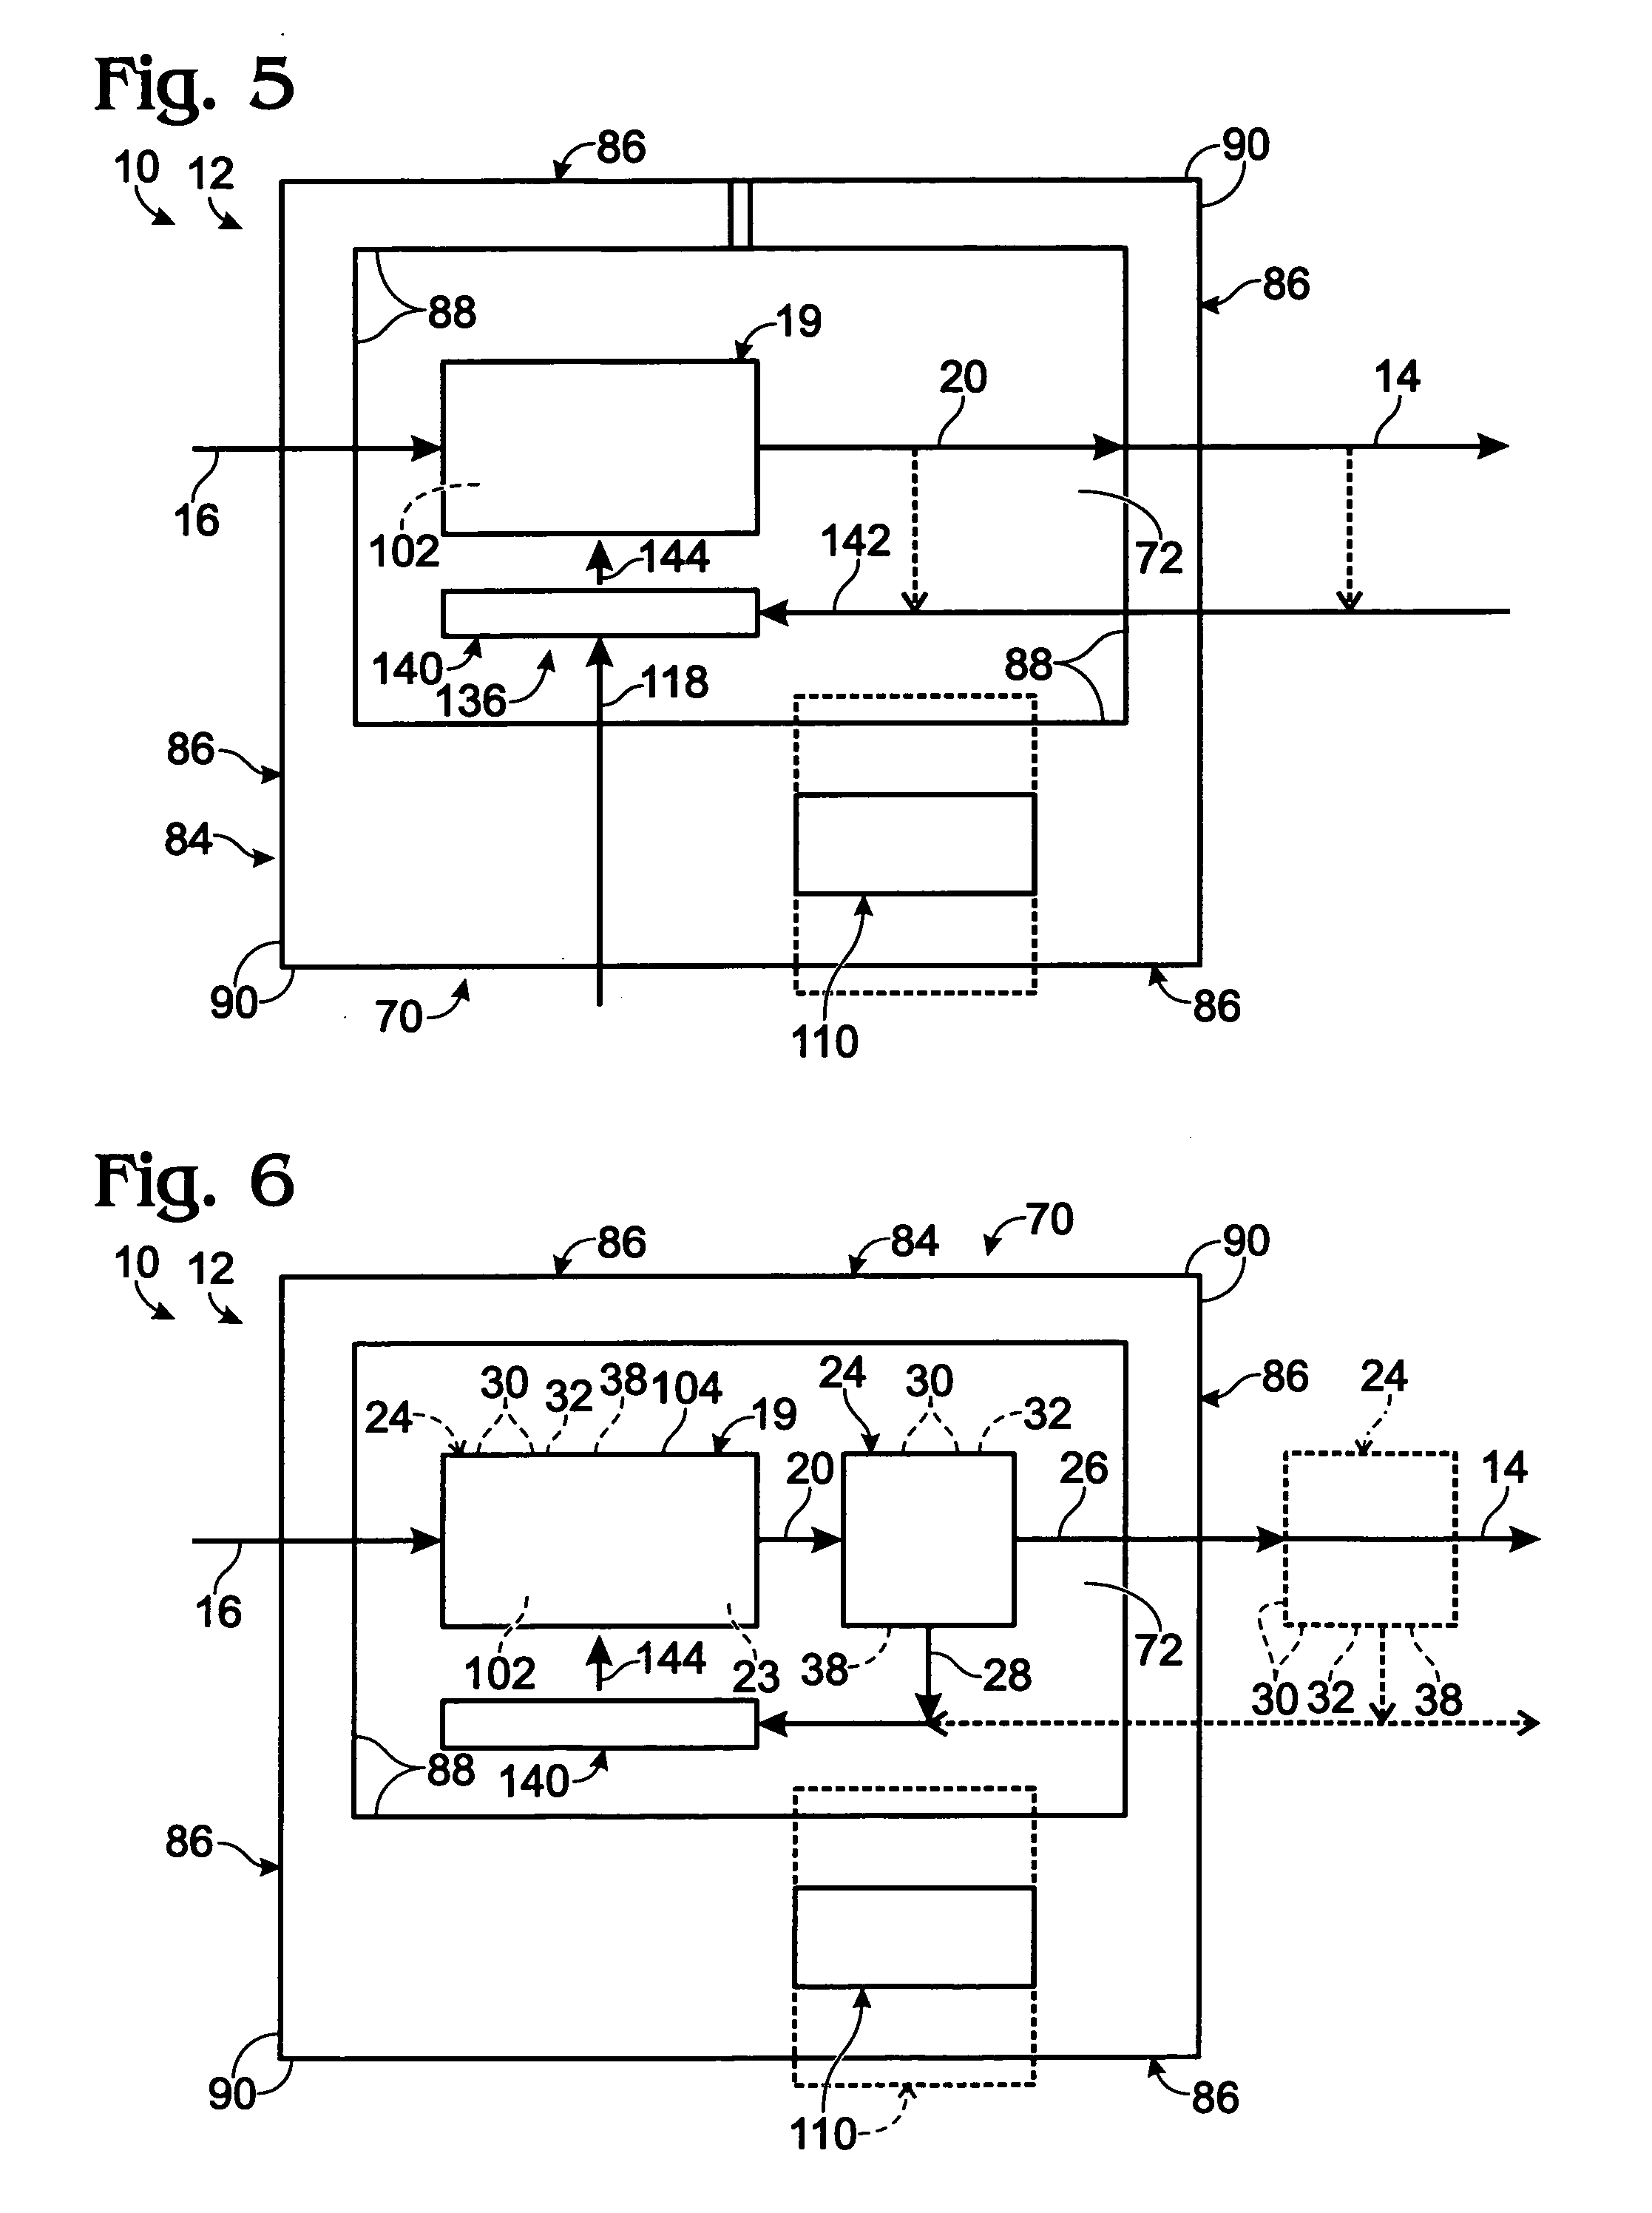 Thermally primed hydrogen-producing fuel cell system